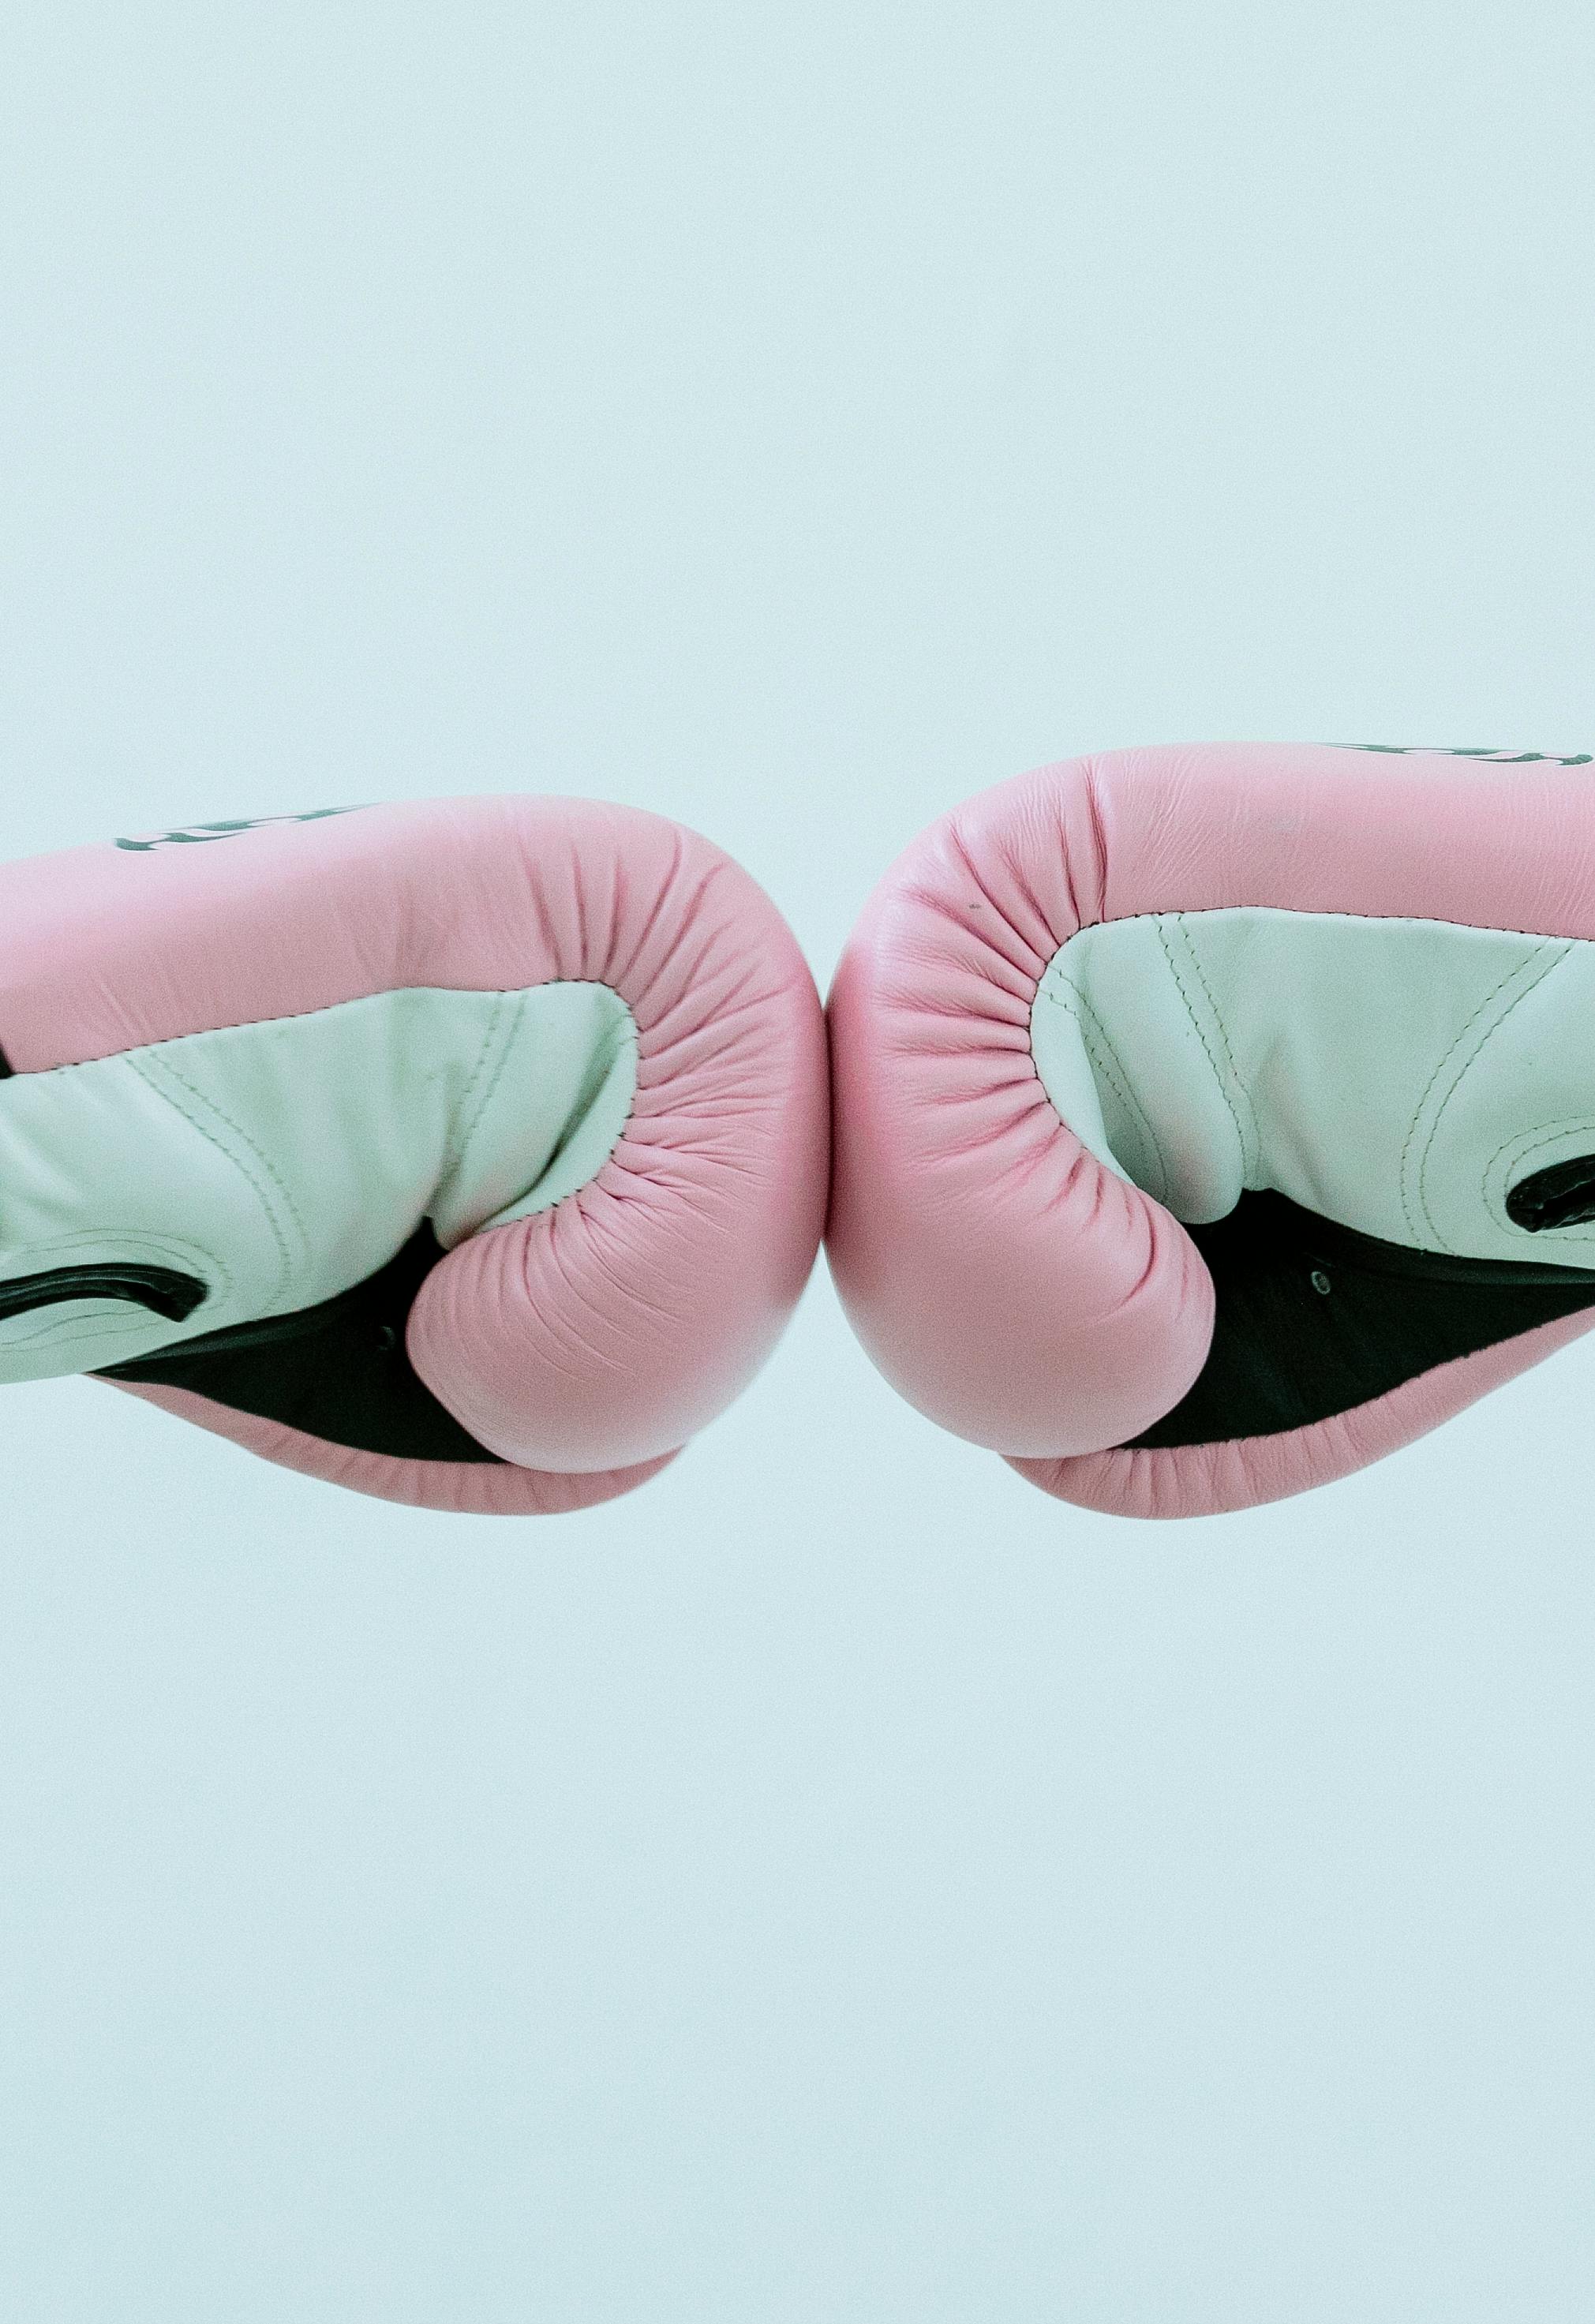 Best Boxing Gloves Pictures HD  Download Free Images on Unsplash